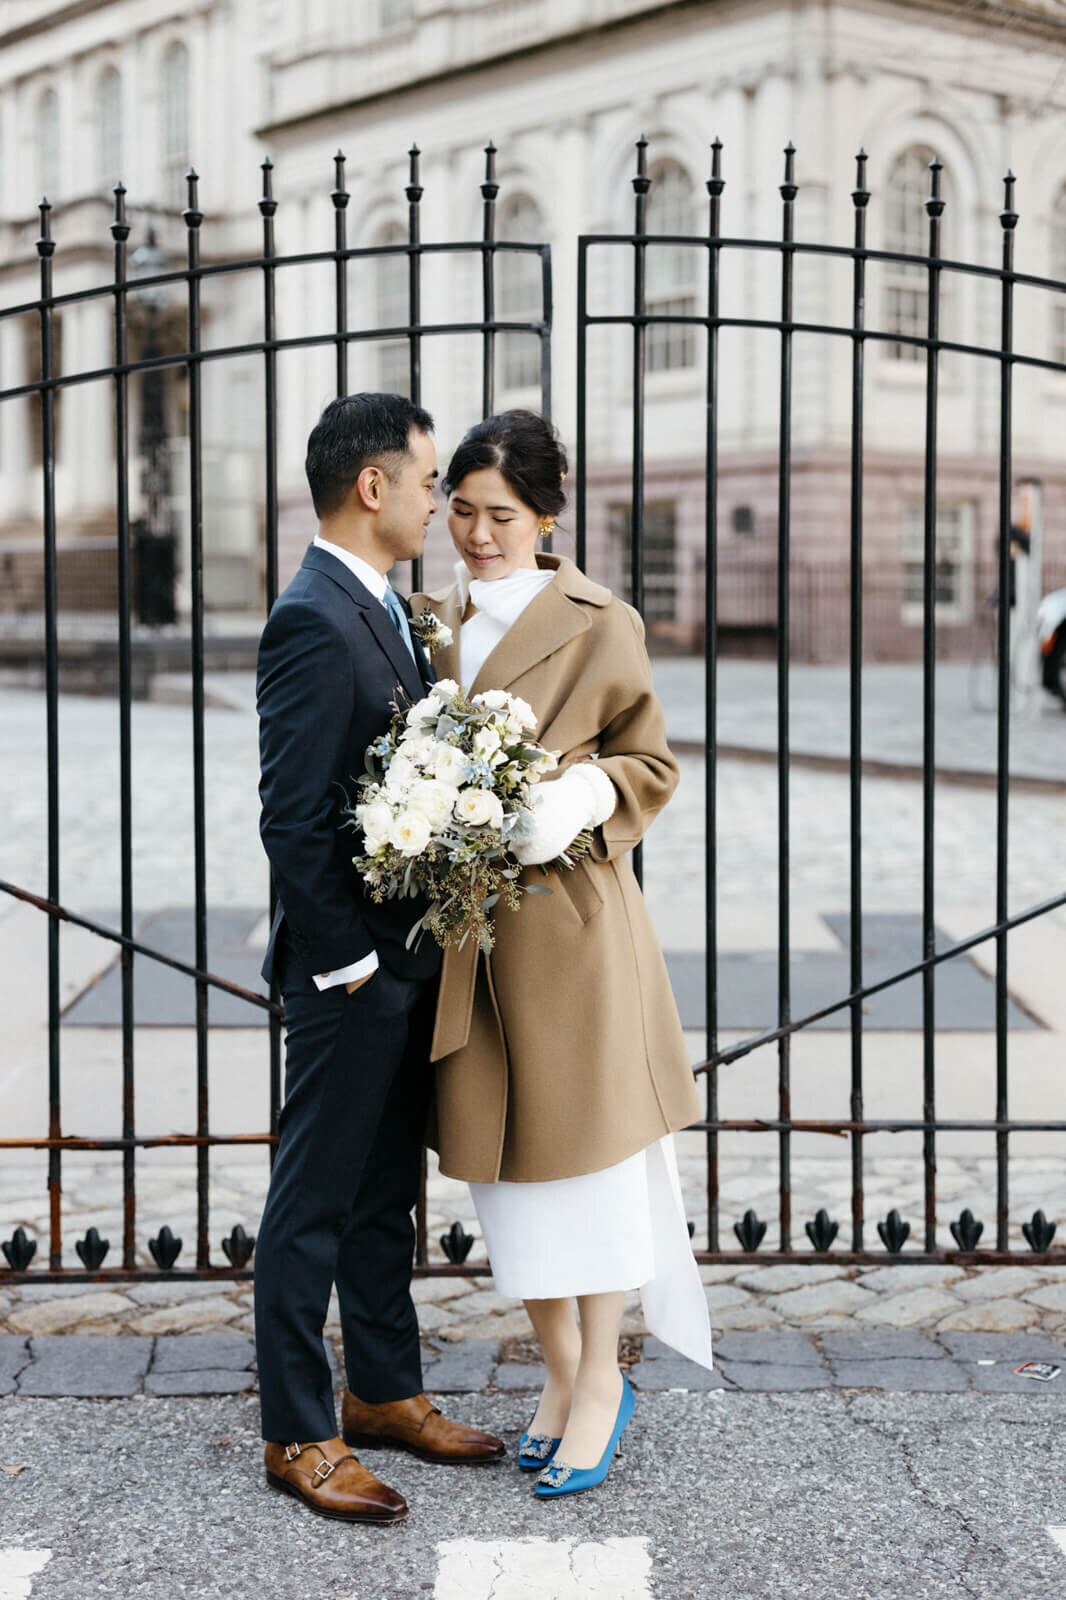 The bride, holding her flower bouquet, together with the groom, are standing in front of the gate of an old building.